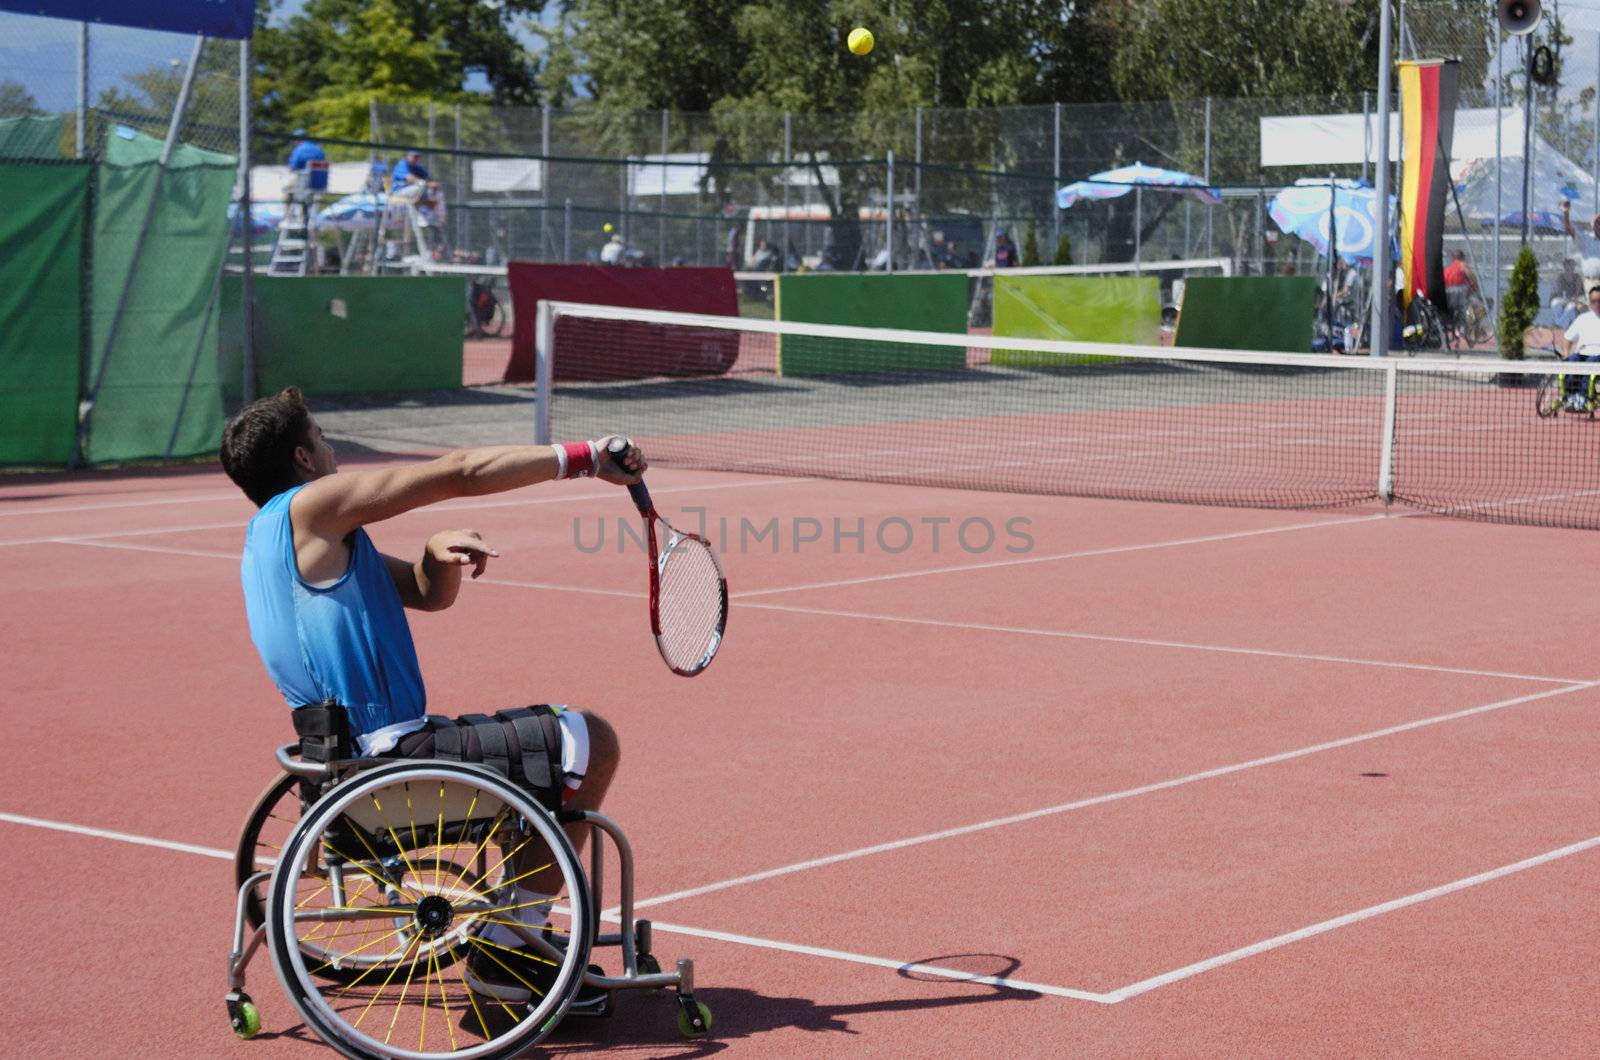 A wheelchair tennis player during a tennis championship match, serving. The ball, with motion blur, is visible centre top.